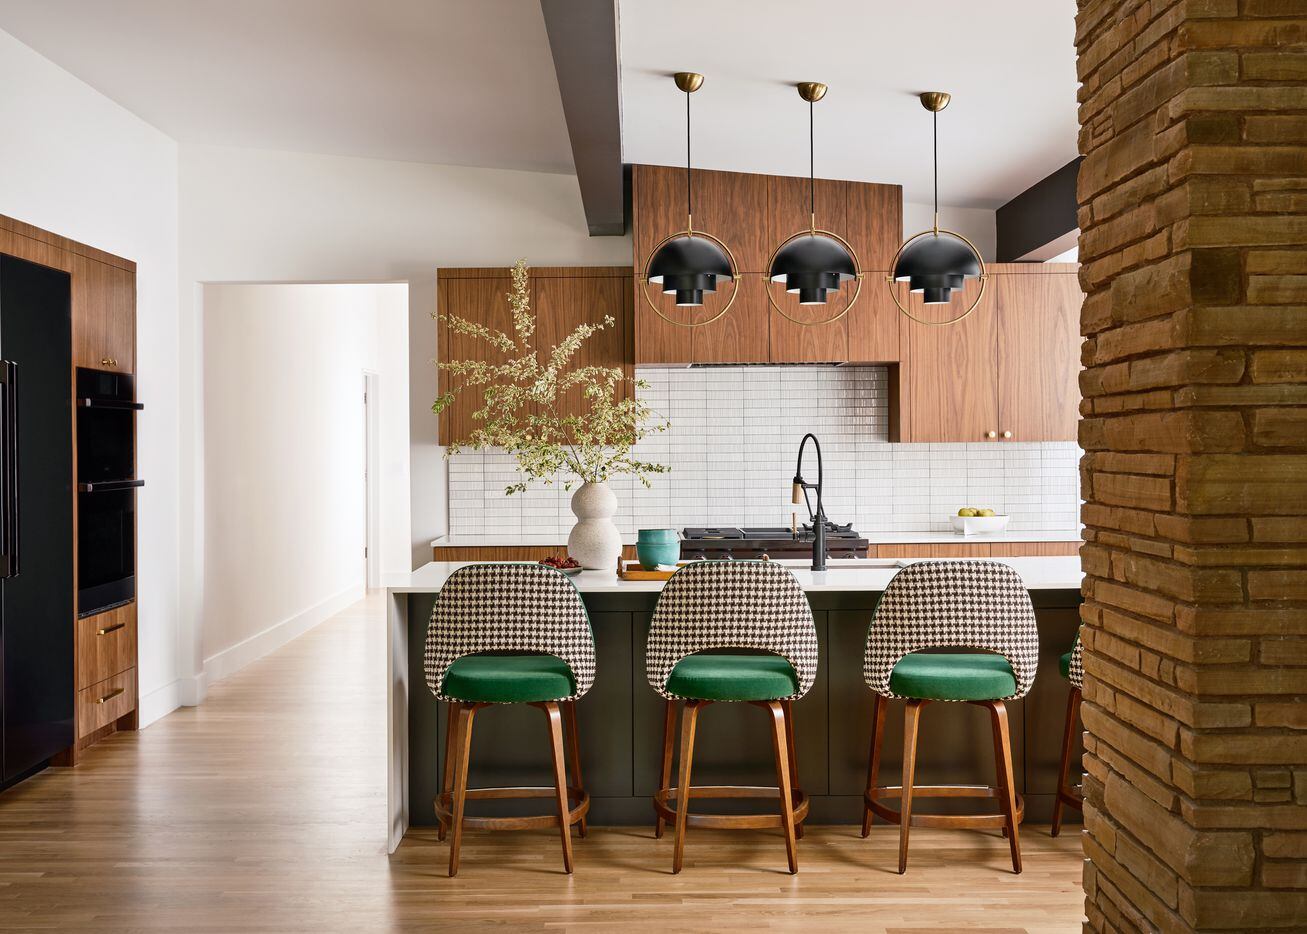 A kitchen features walnut cabinetry, a large island with barstools, and ceramic vases.